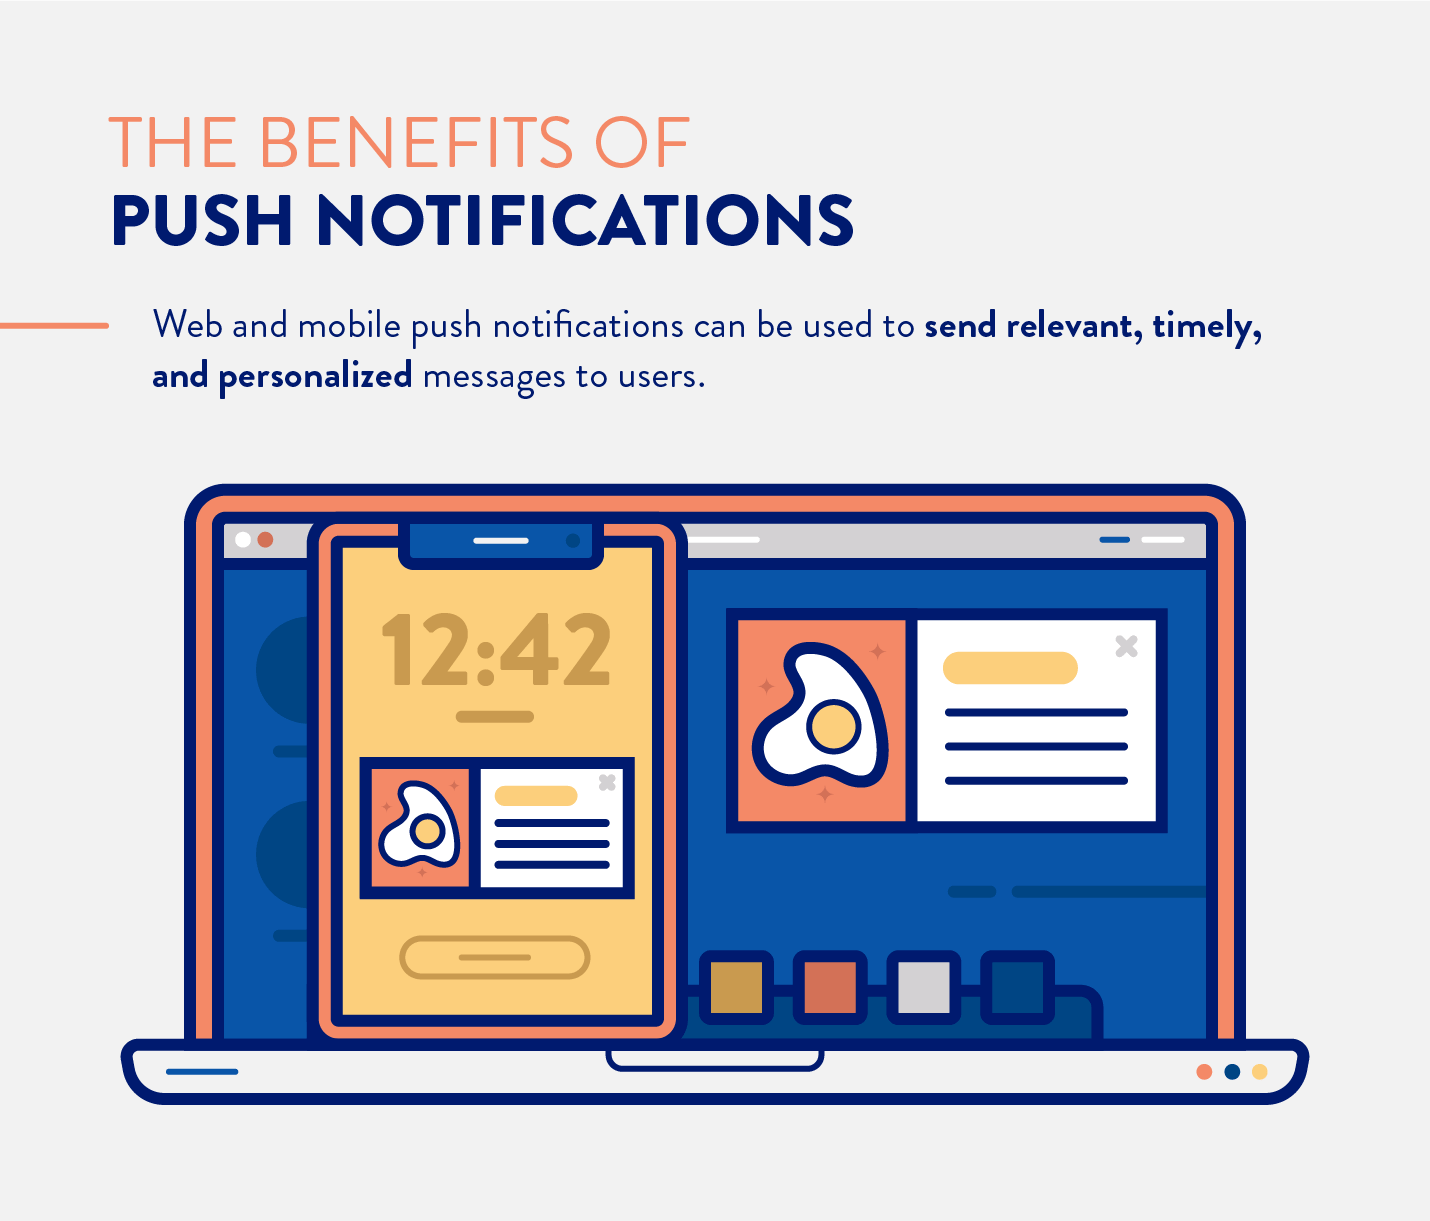 the benefits of push notifications including web and mobile which can be used to send timely, relevant, and personalized messages. 